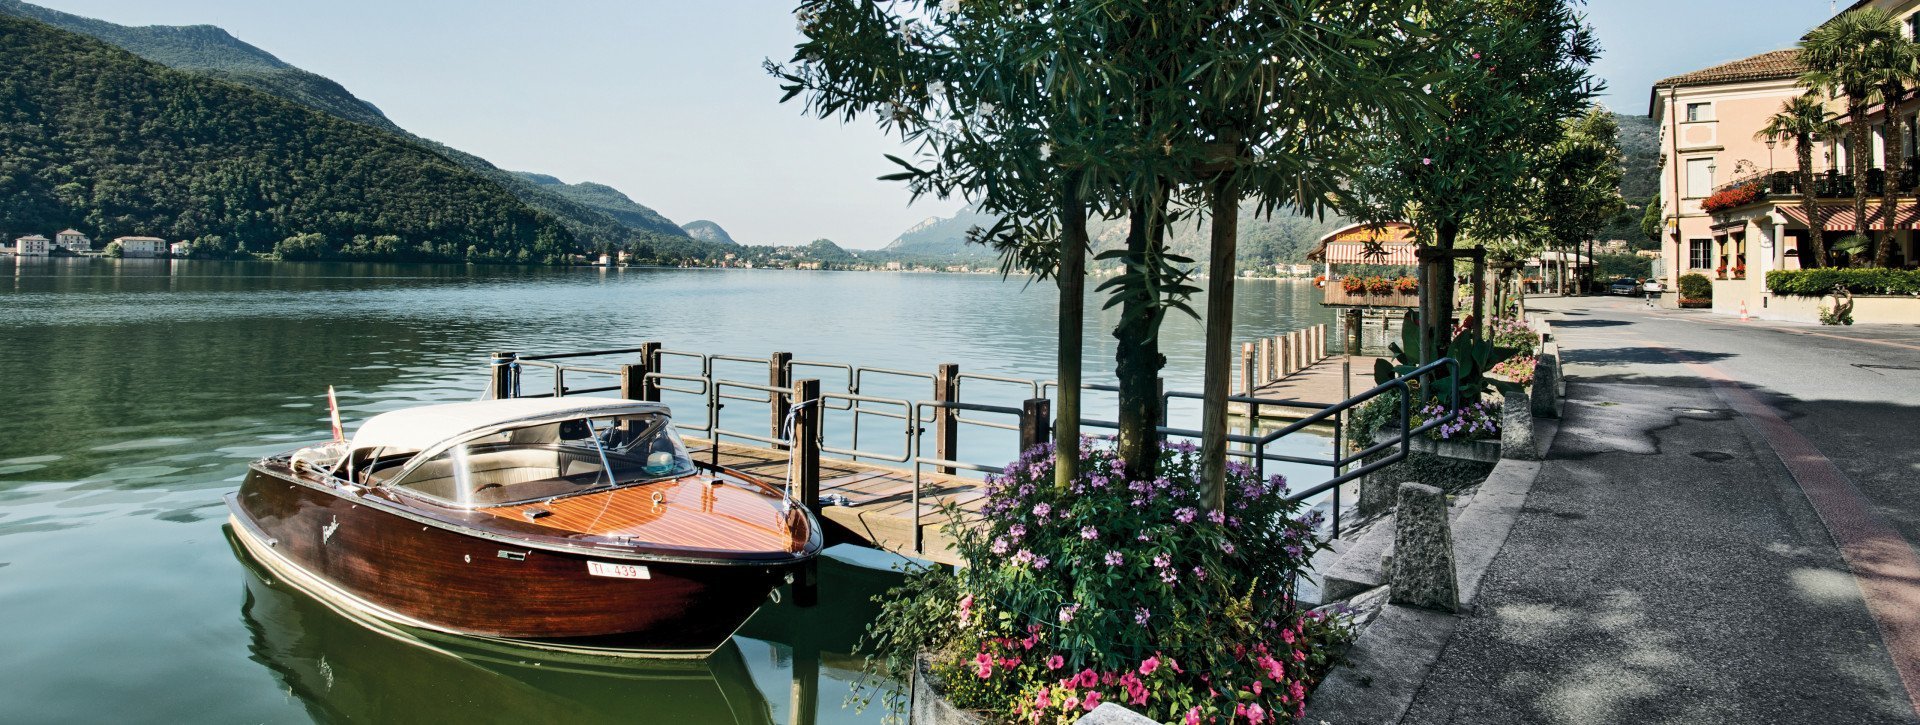 A wooden boat on the Lugano lake 